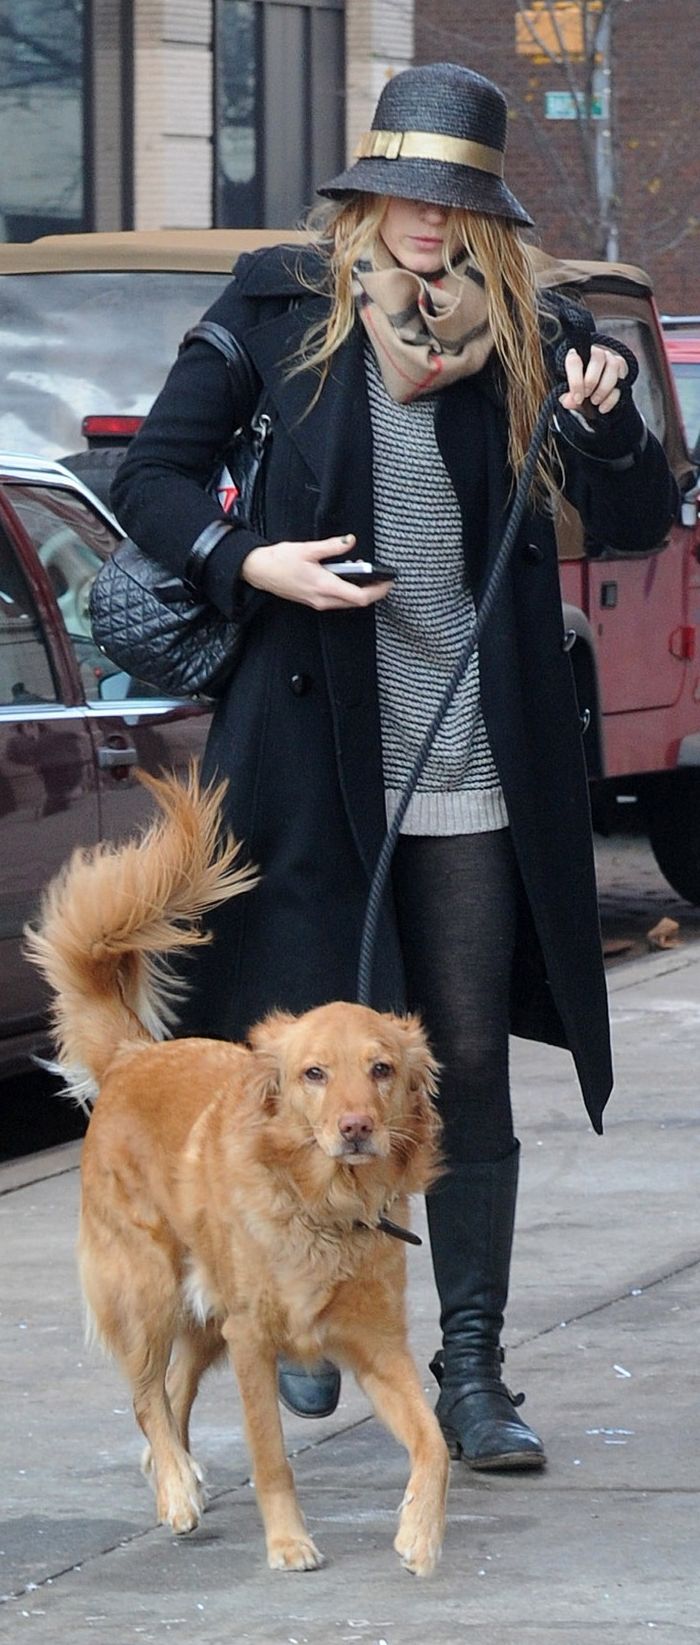 Blake Lively in the street with her Golden Retriever on a leash